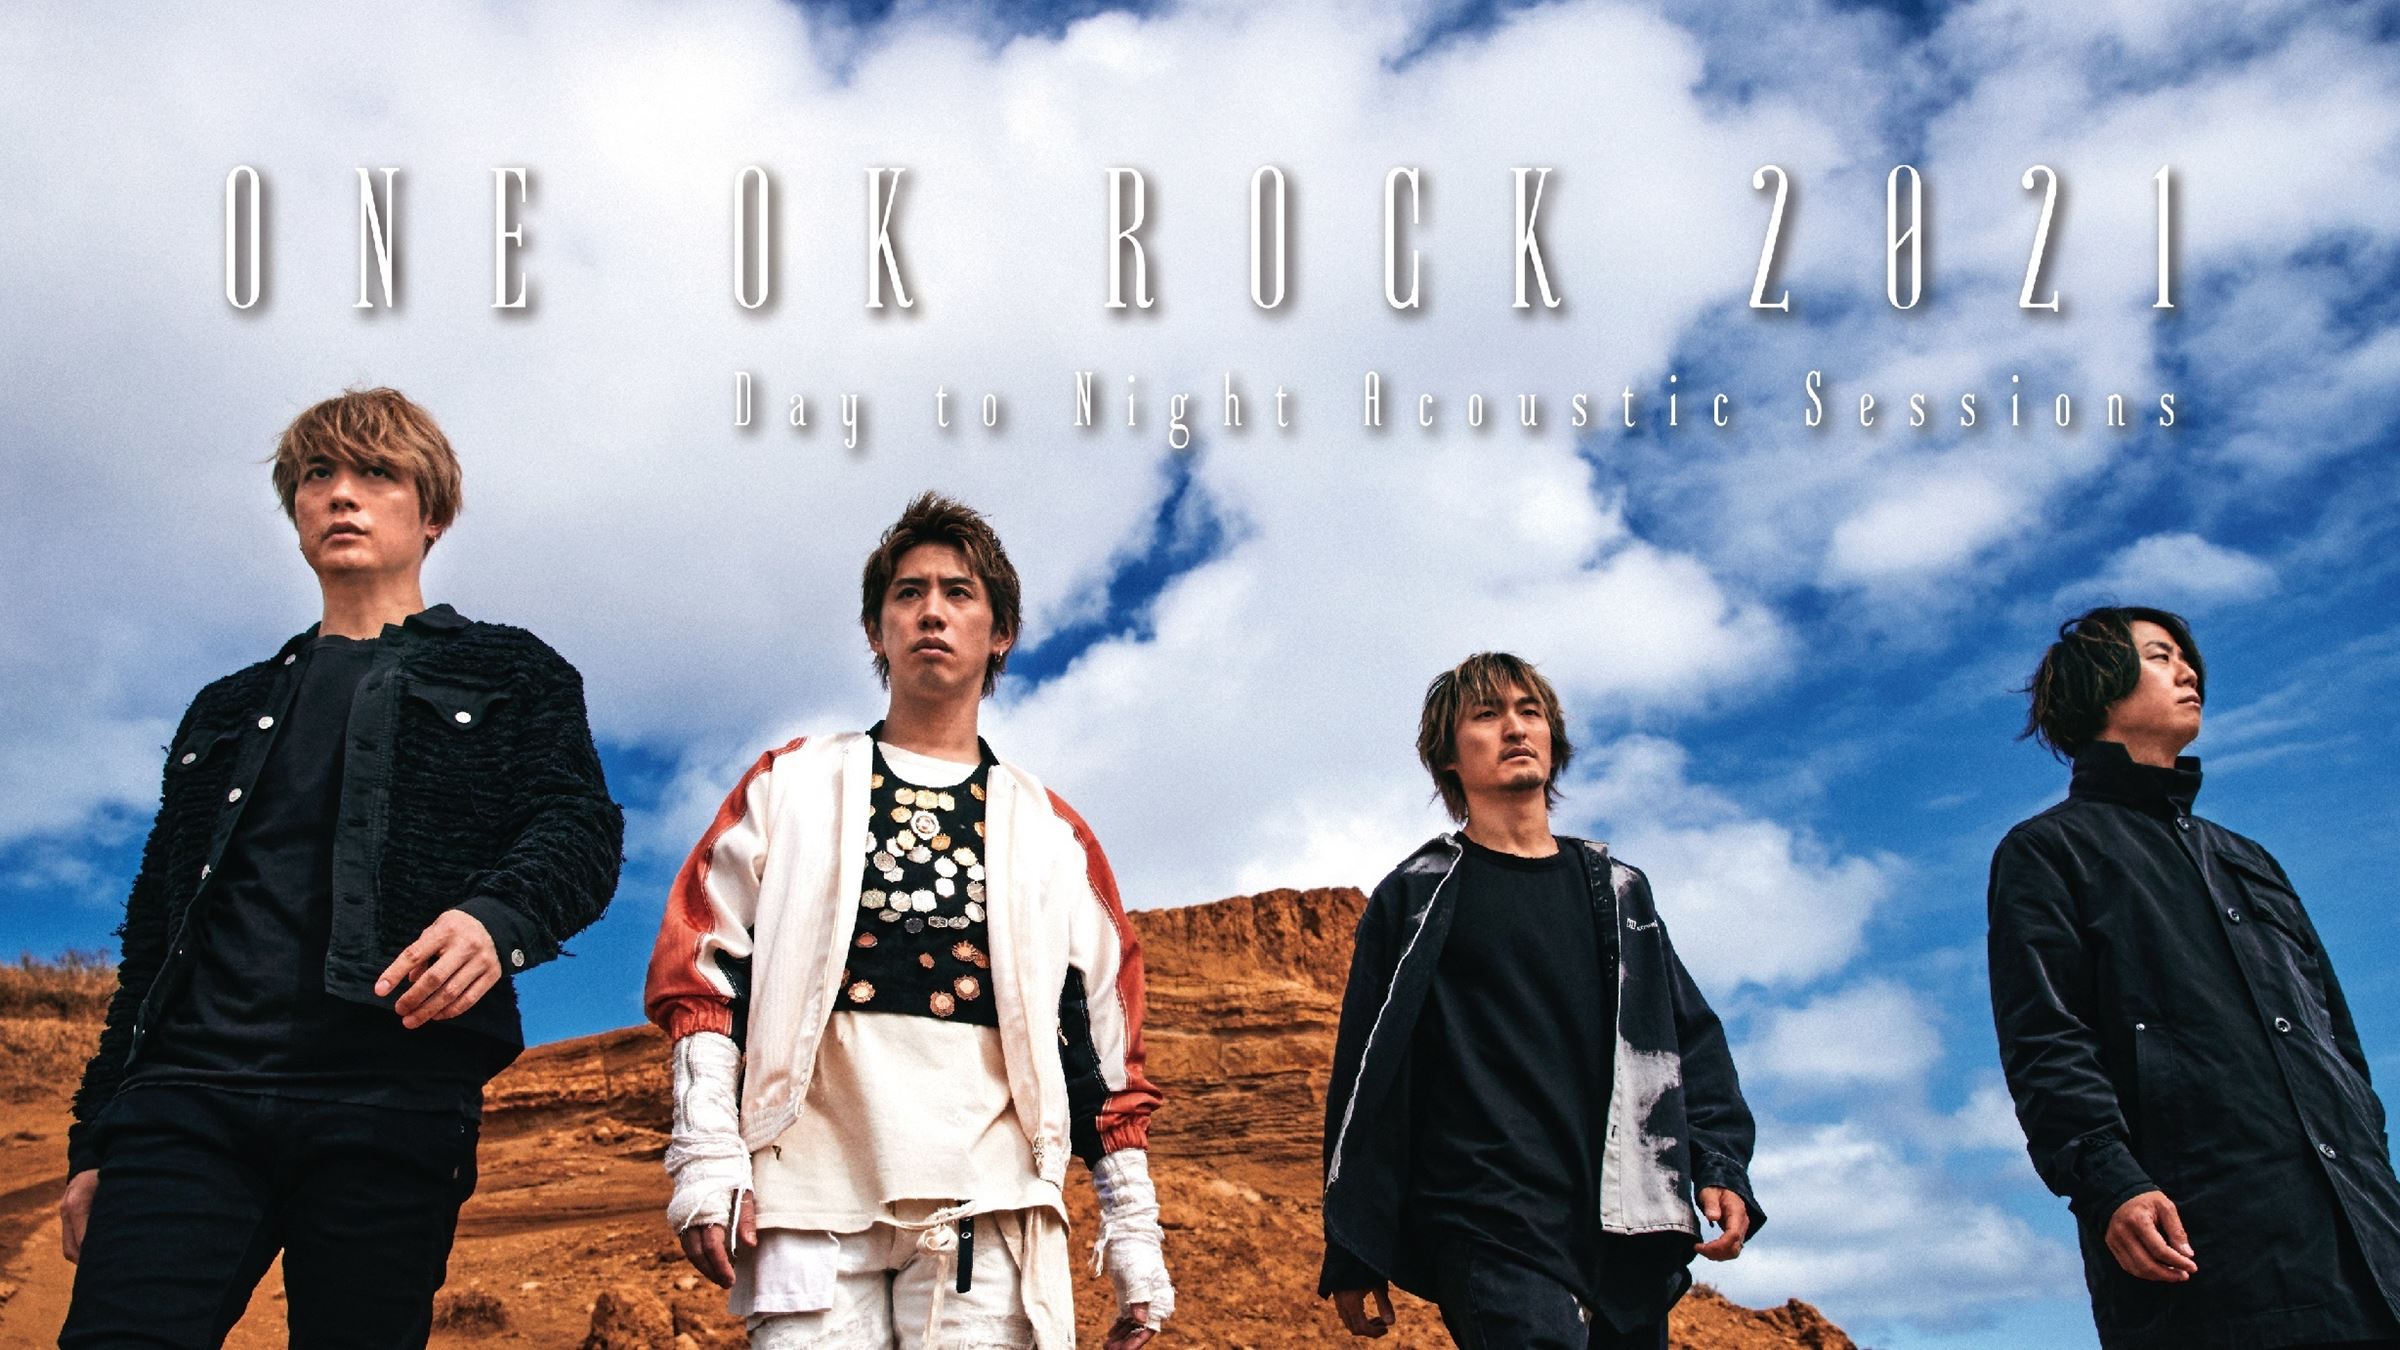 『ONE OK ROCK 2021 “Day to Night Acoustic Sessions”』キービジュアル